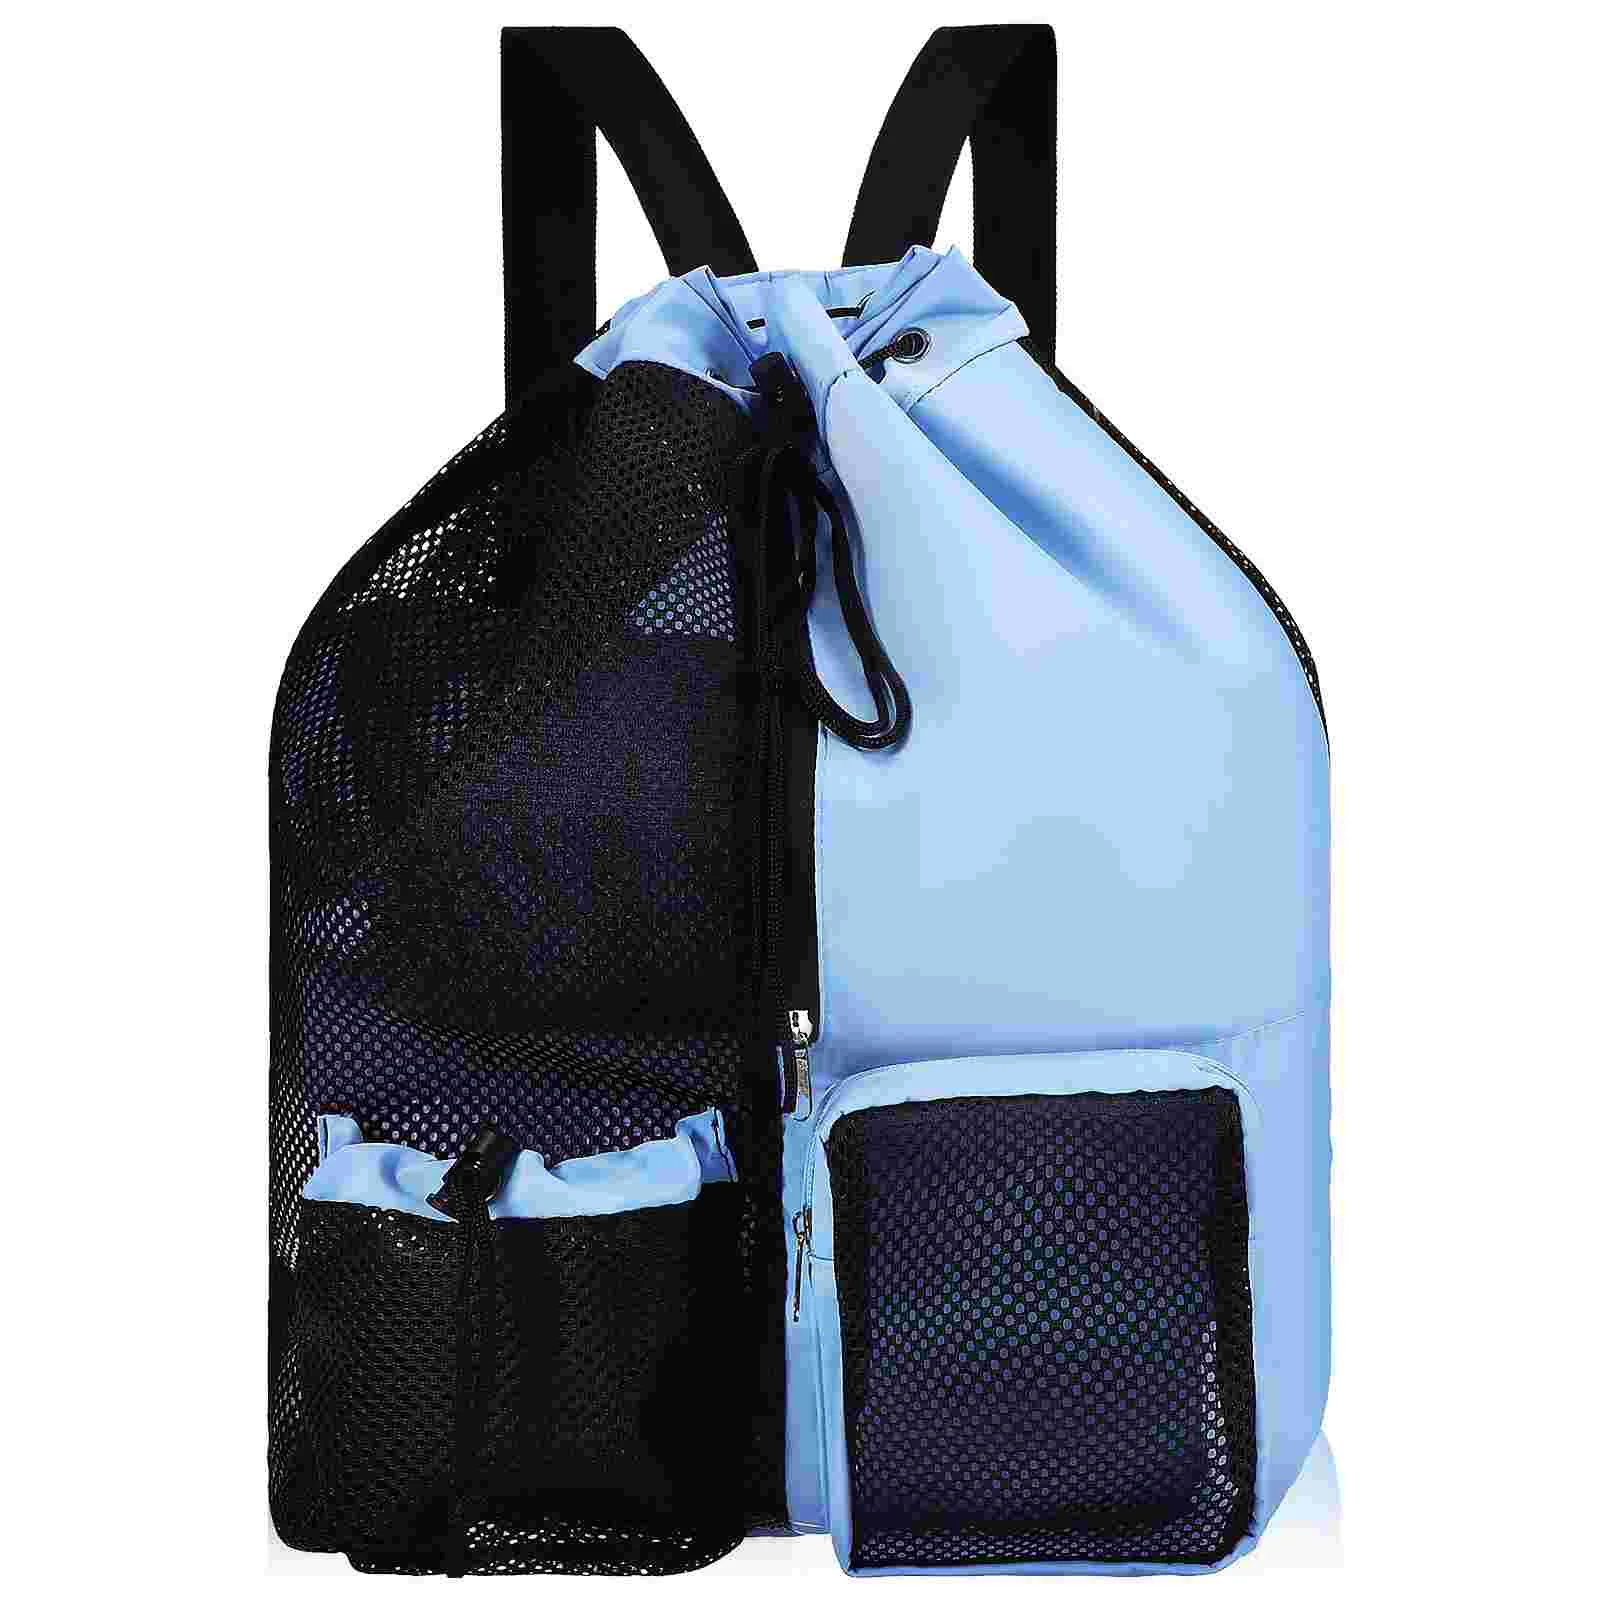 Swimming Bag Mesh Drawstring Bag Sports Backpack Swim Backpack Mesh Swim Bag For Men Women Adults chinese rubber band jumping rope outdoor sports games for adults children parent child toys kinder spiele giochi per bambini